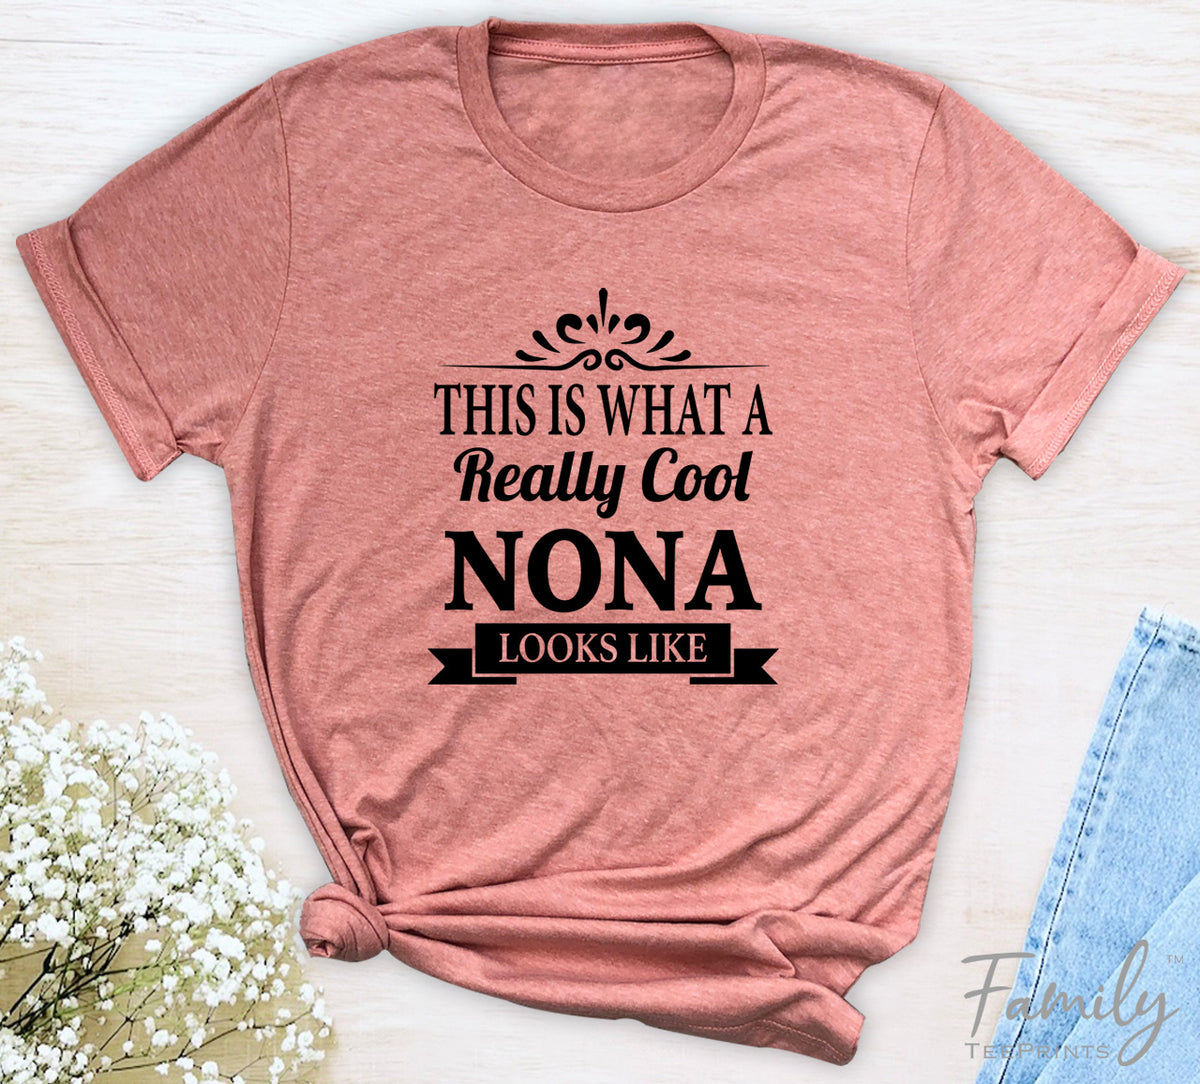 This Is What A Really Cool Nona Looks Like - Unisex T-shirt - Nona Shirt - Gift For Nona - familyteeprints